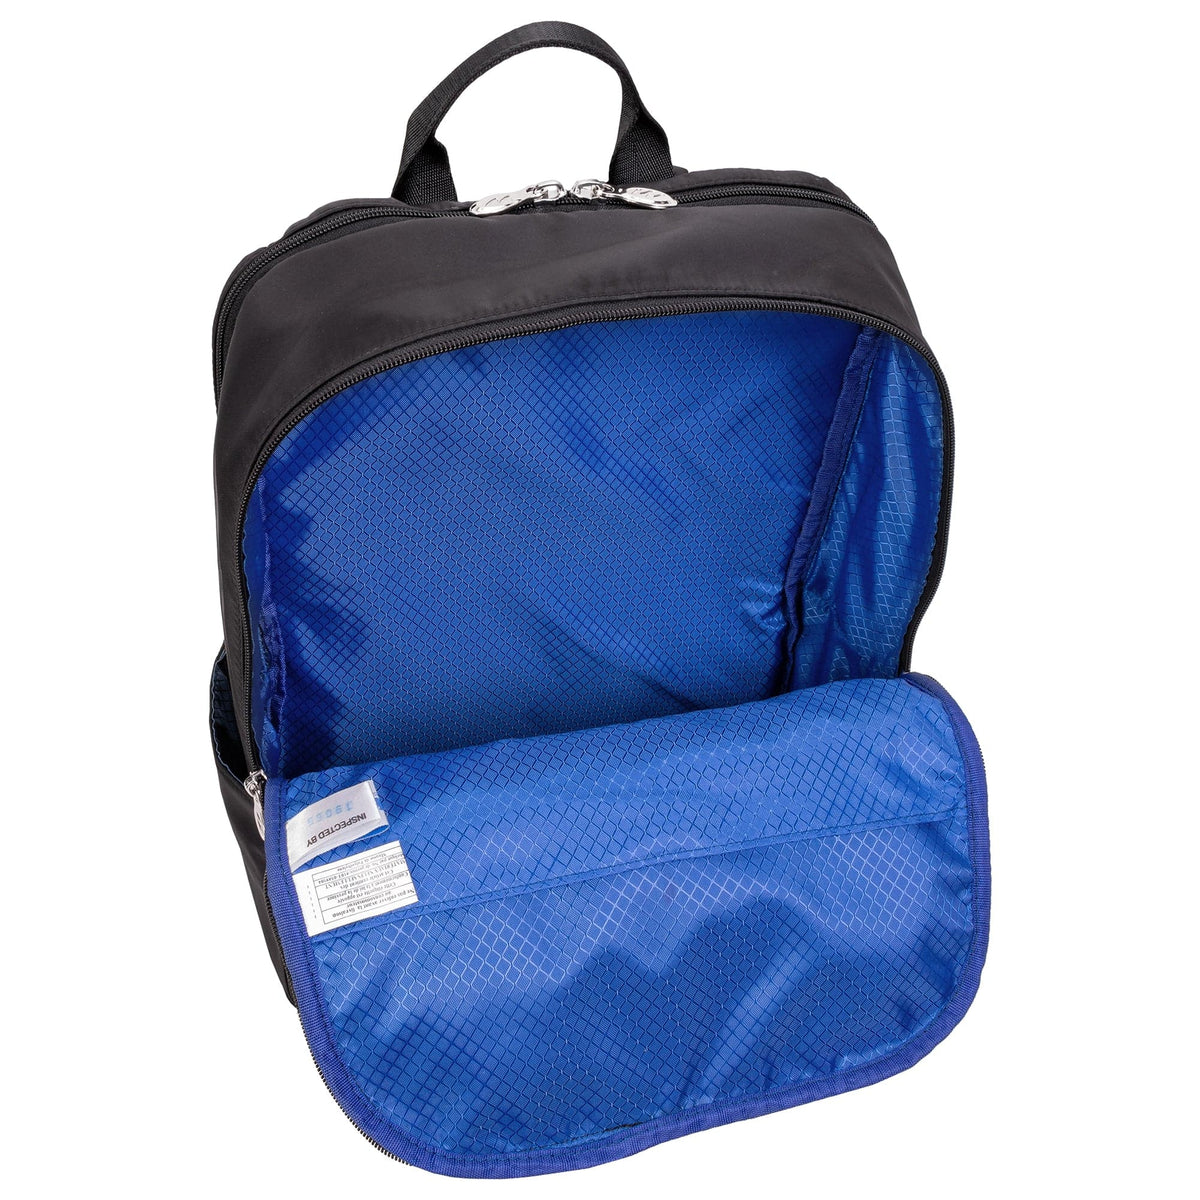 McKlein N Series Transporter 15" Dual-Compartment Laptop and Tablet Nylon Backpack